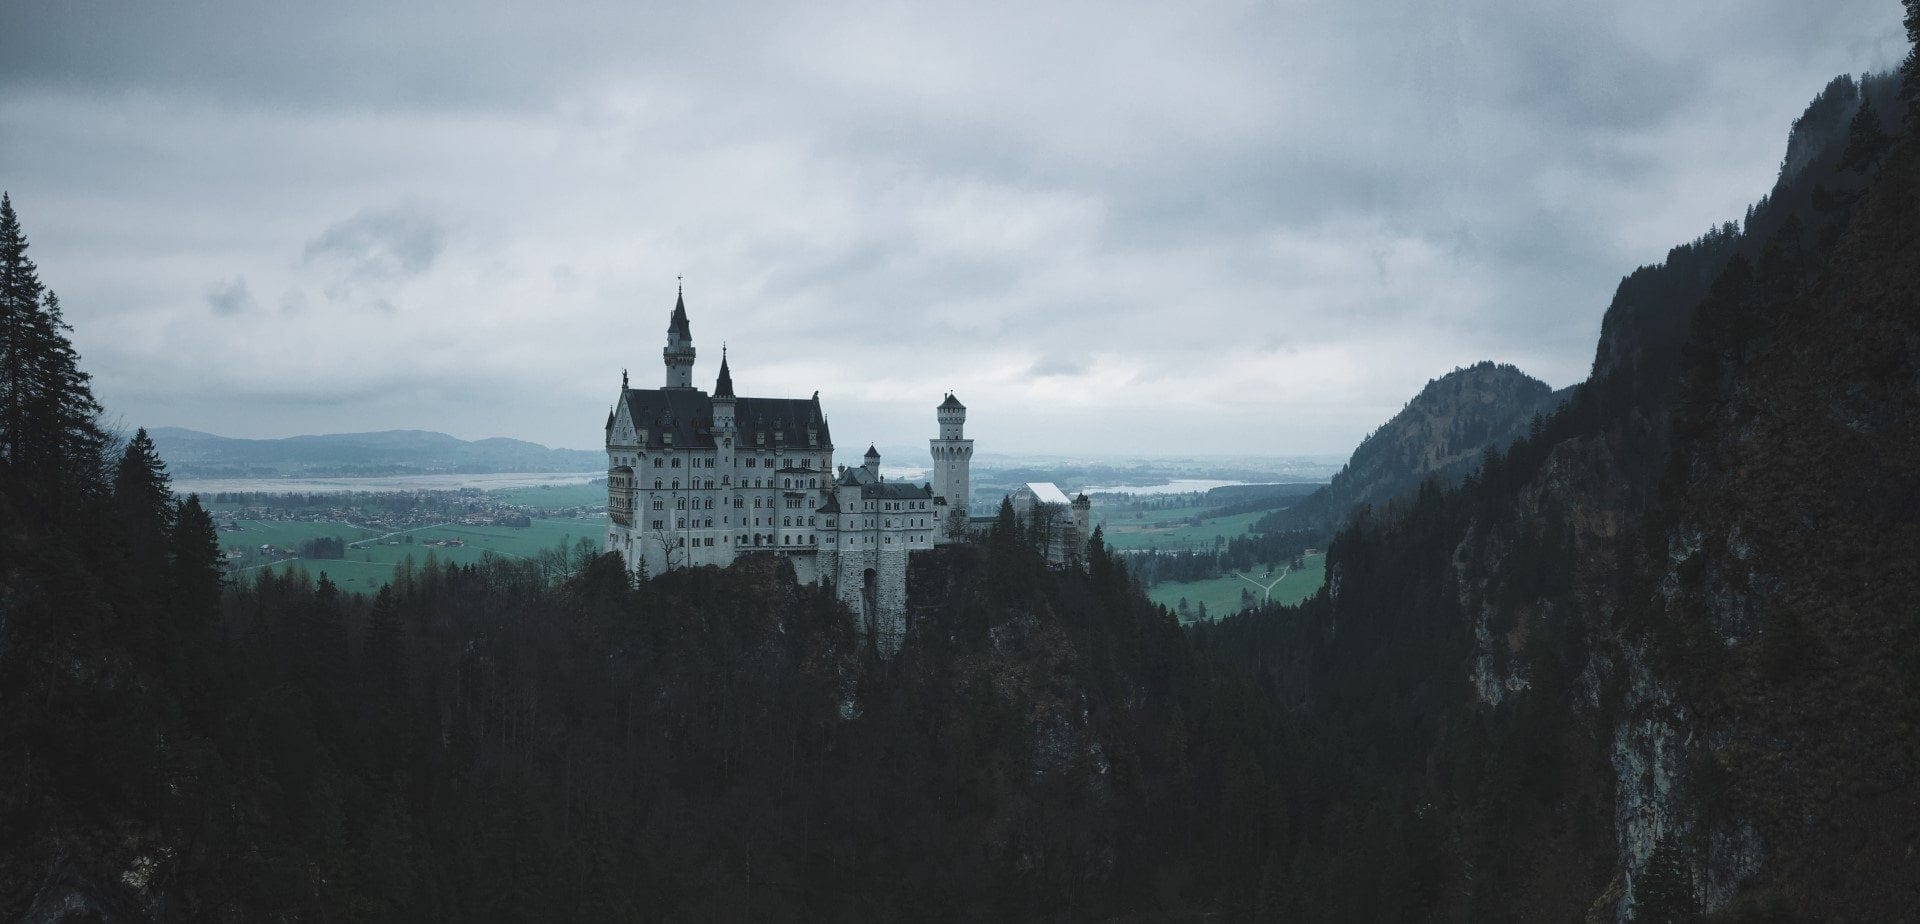 The amazing Neuschwanstein Castle in Southern Germany